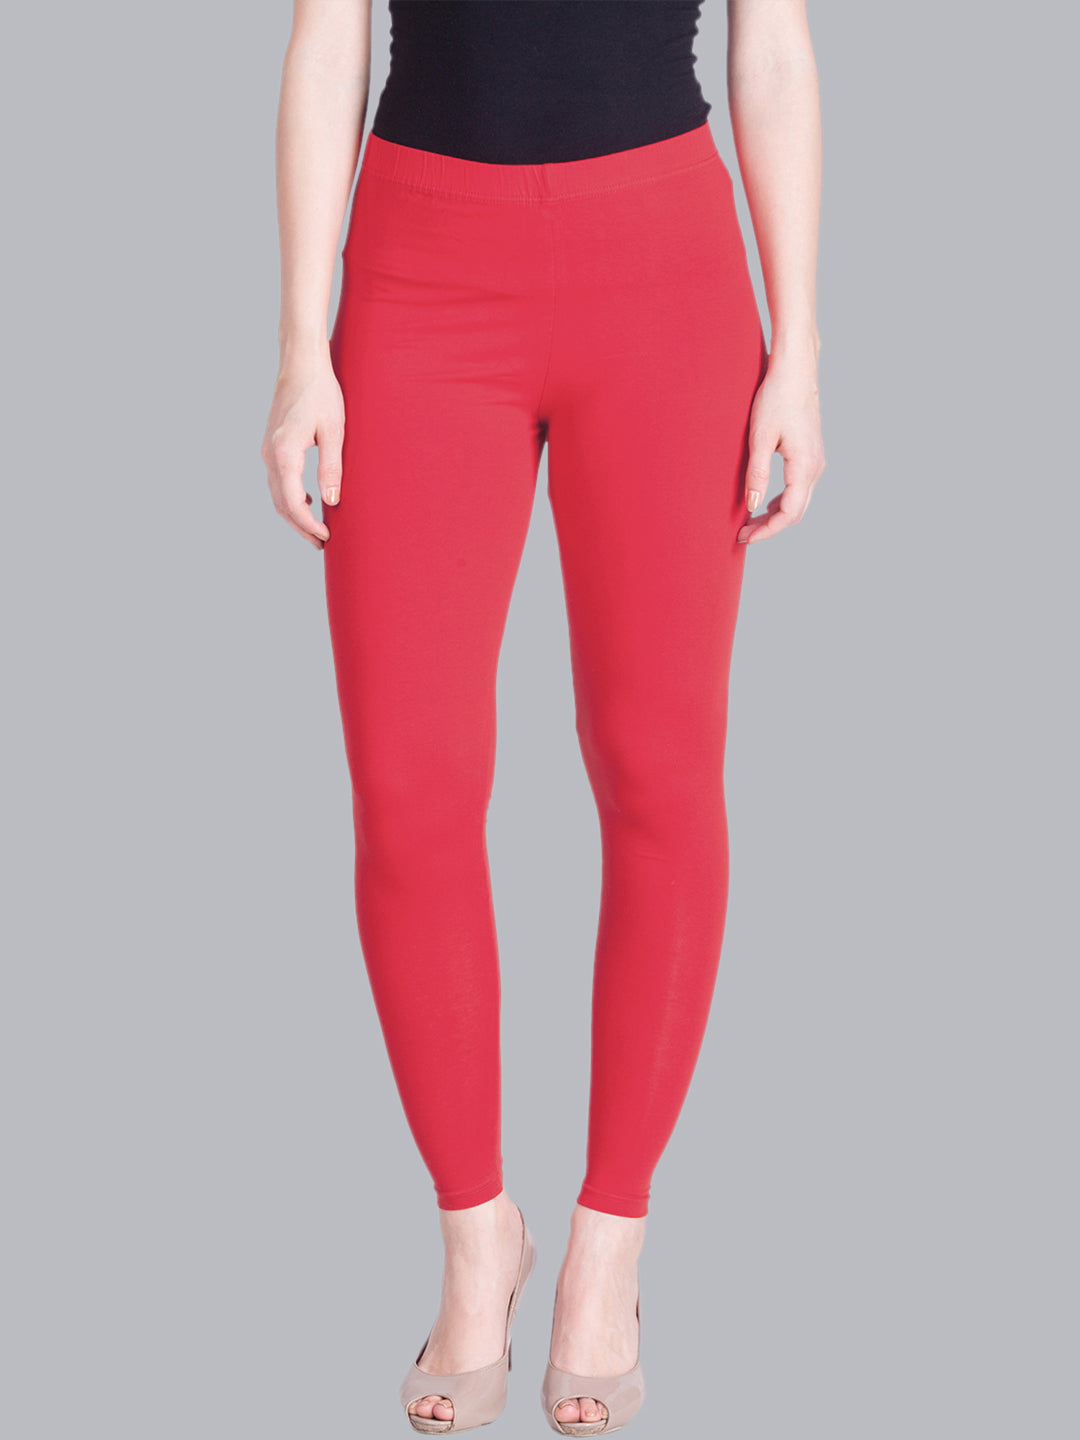 Buy Lux Lyra Legging L02 Parry Red Free Size Online at Low Prices